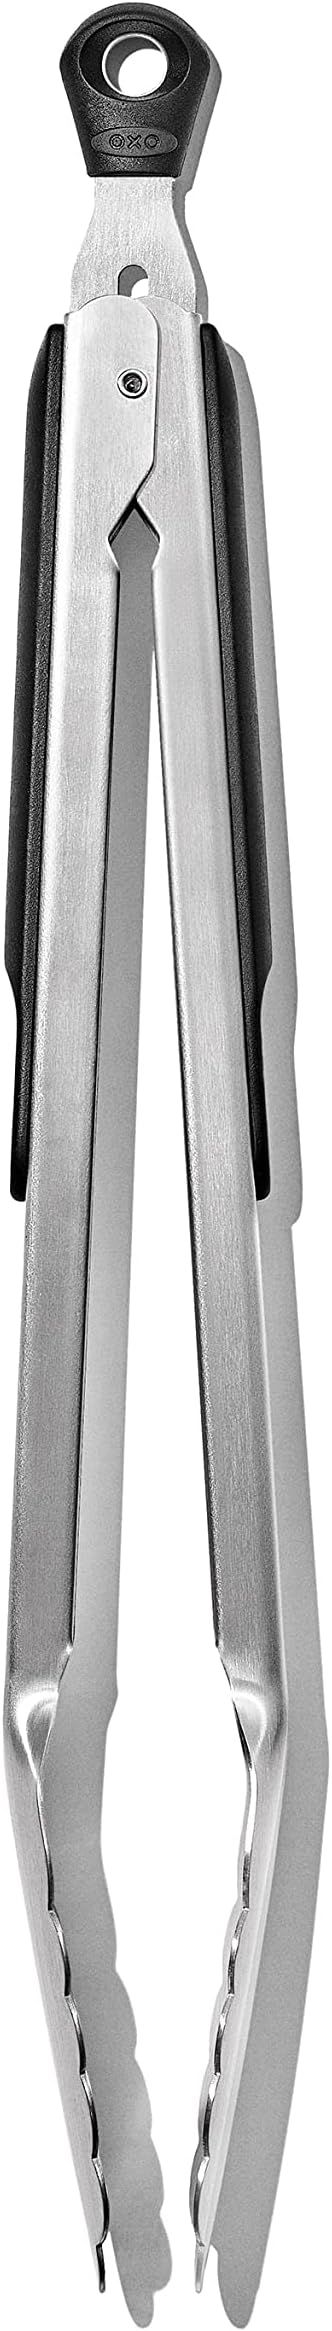 OXO Good Grips 12-Inch Stainless-Steel Locking Tongs | Amazon (US)